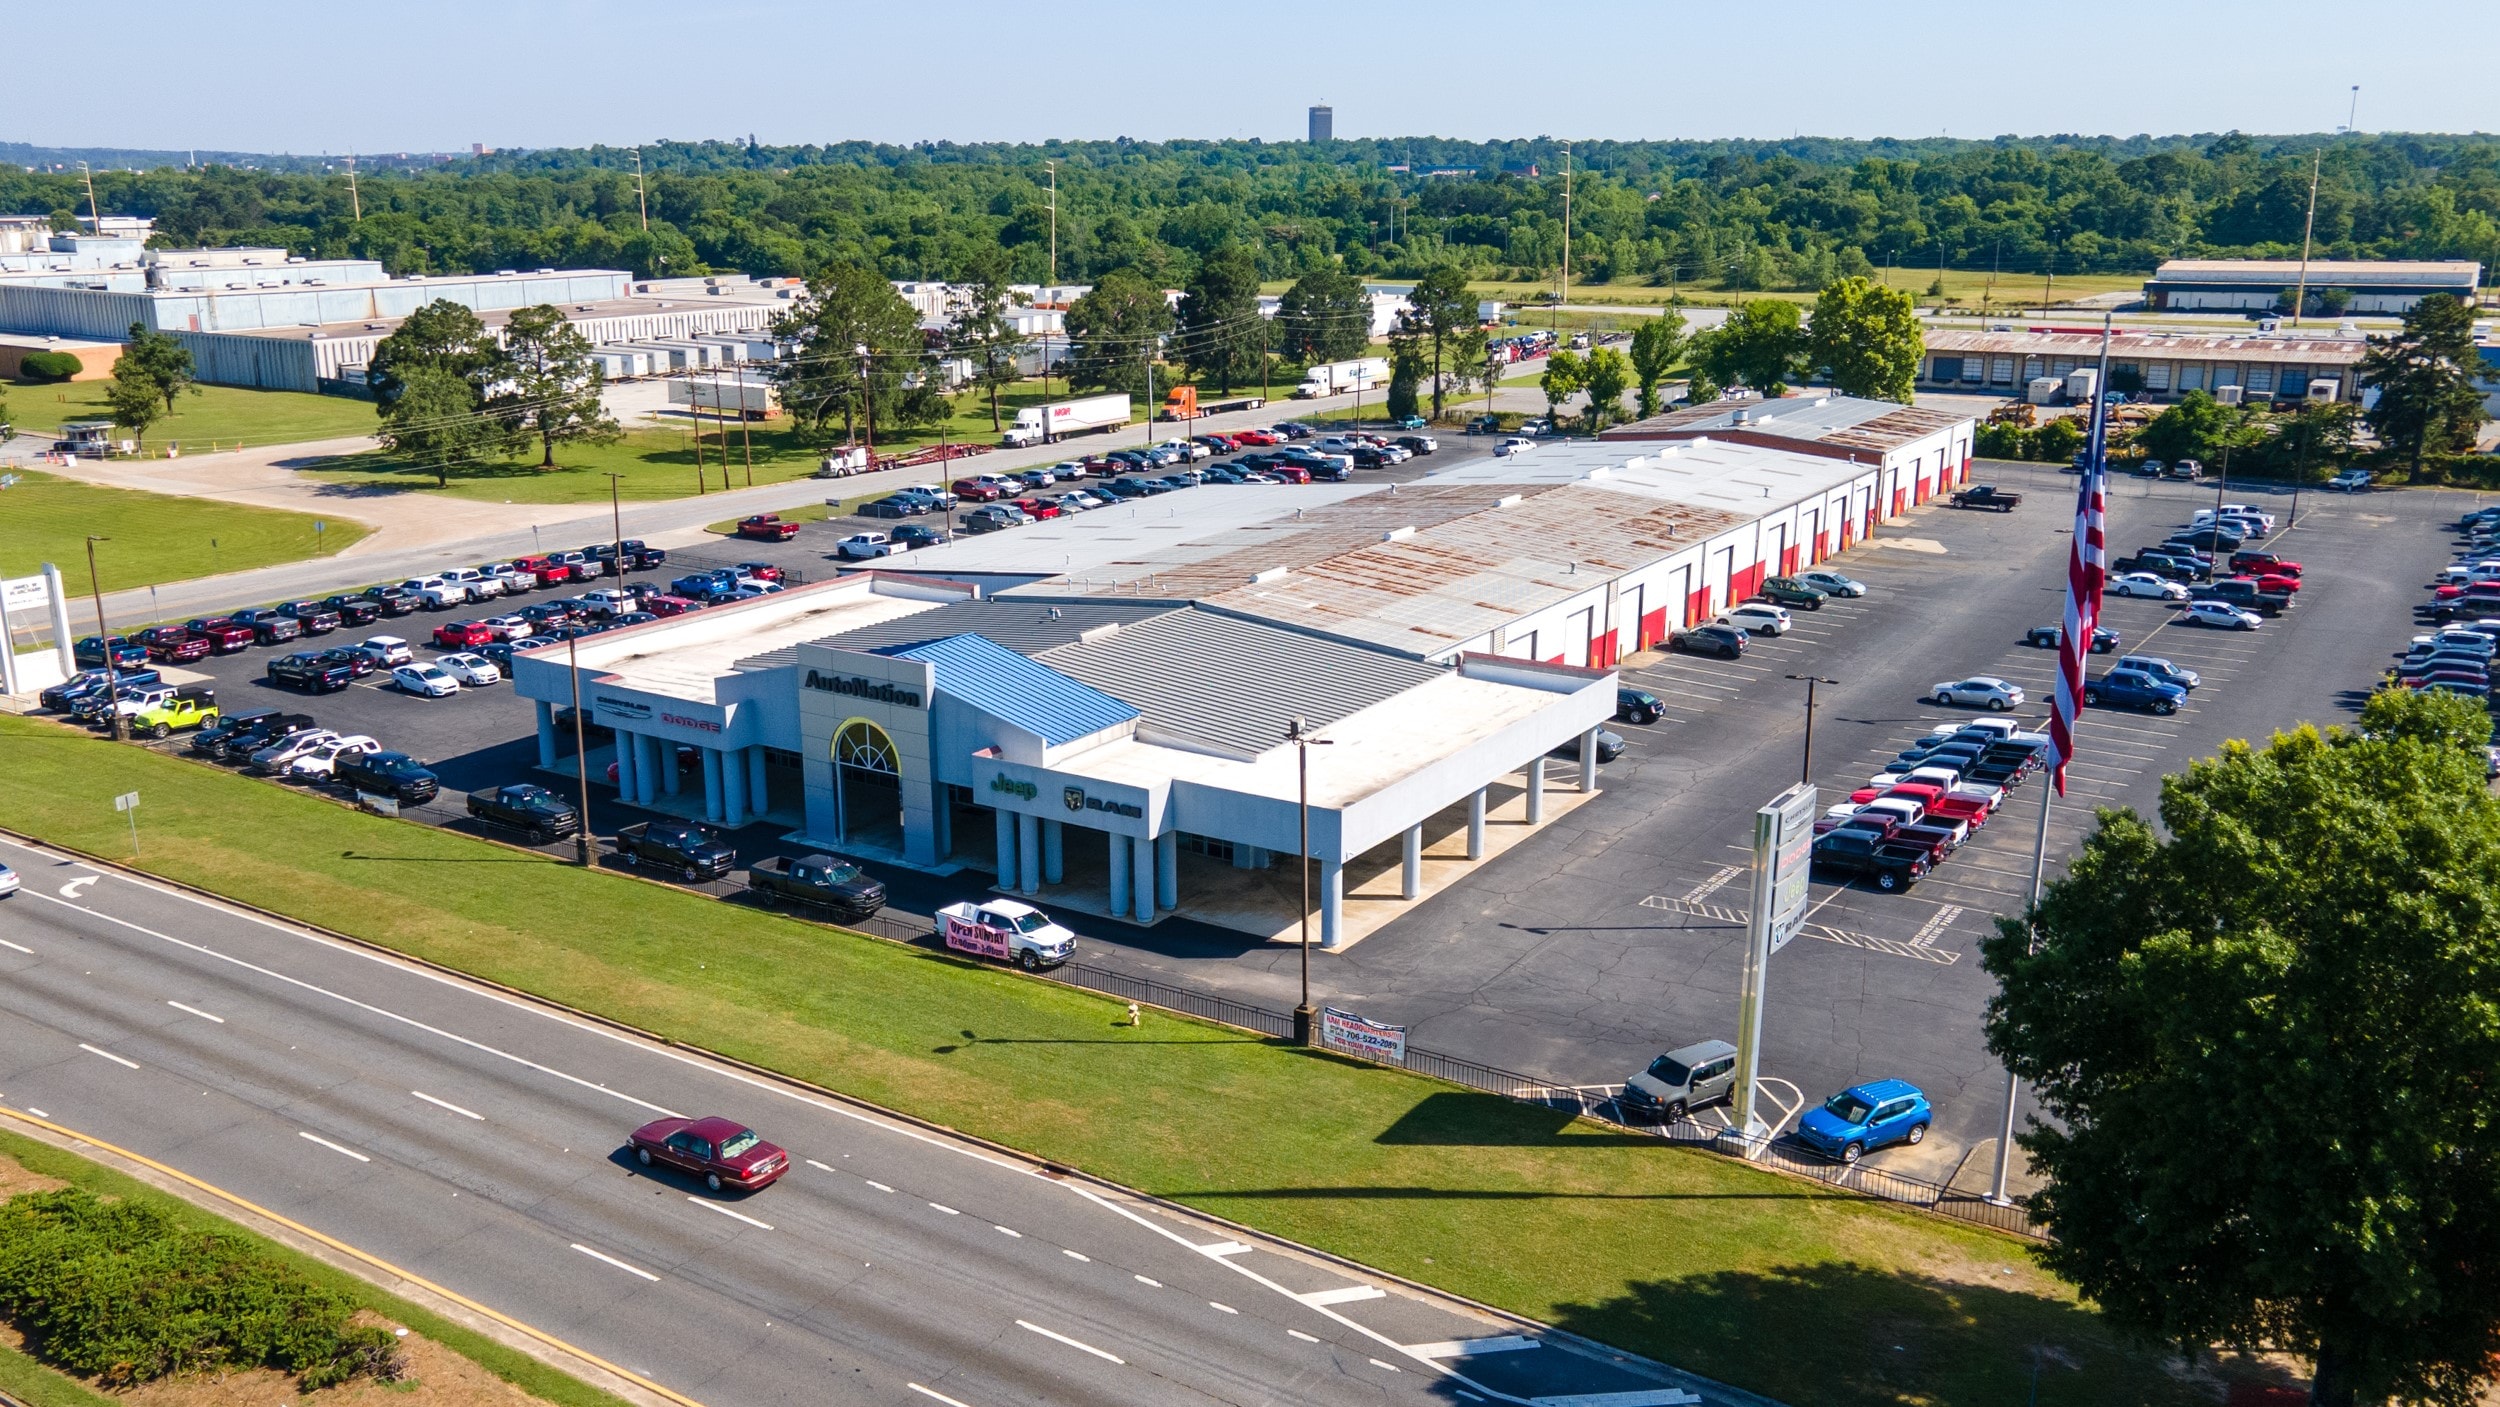 Overhead exterior view of AutoNation Chrysler Dodge Jeep Ram South Columbus during the day. There is a clear sky and many vehicles parked near the grey building. Trees and greenery are visible around the parking lot and surrounding area.